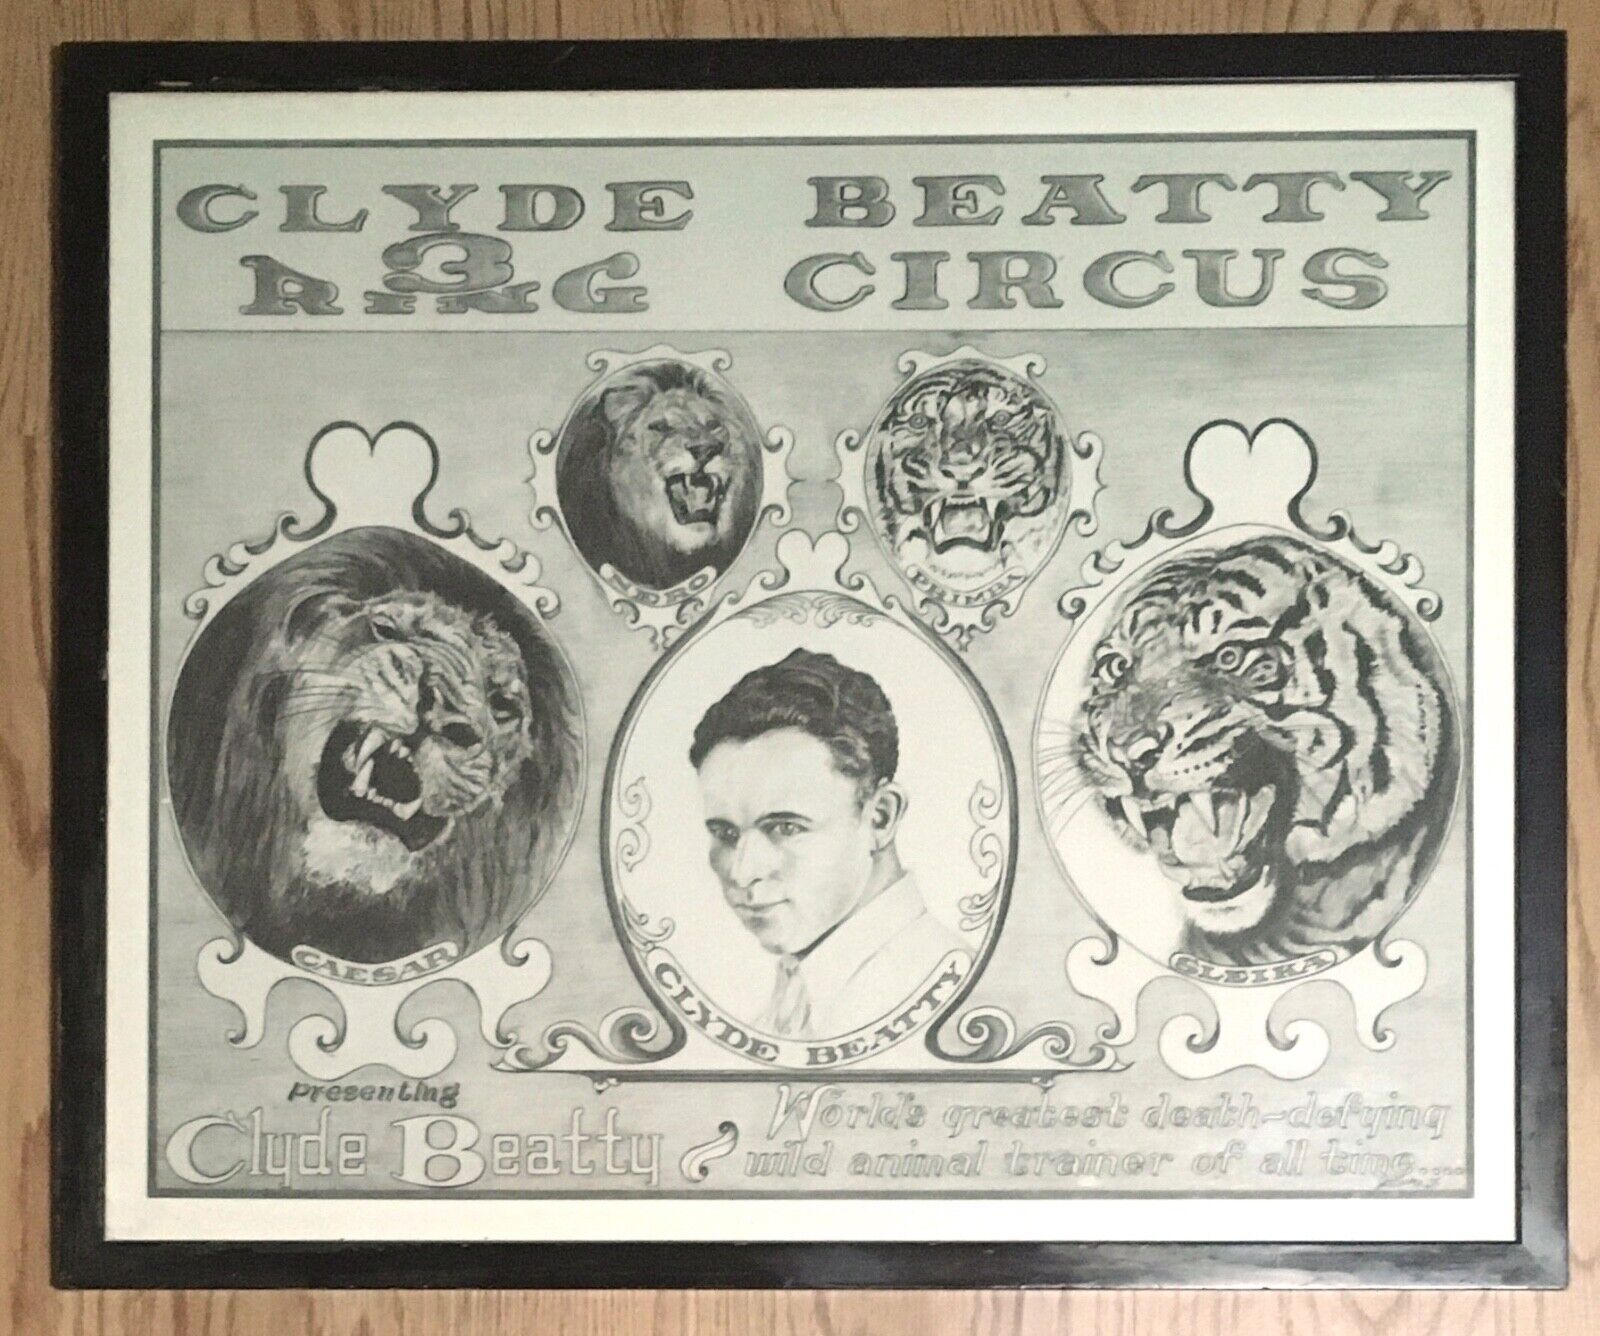 Vintage Framed Clyde Beatty Circus Poster Design by Jerry Booker 20